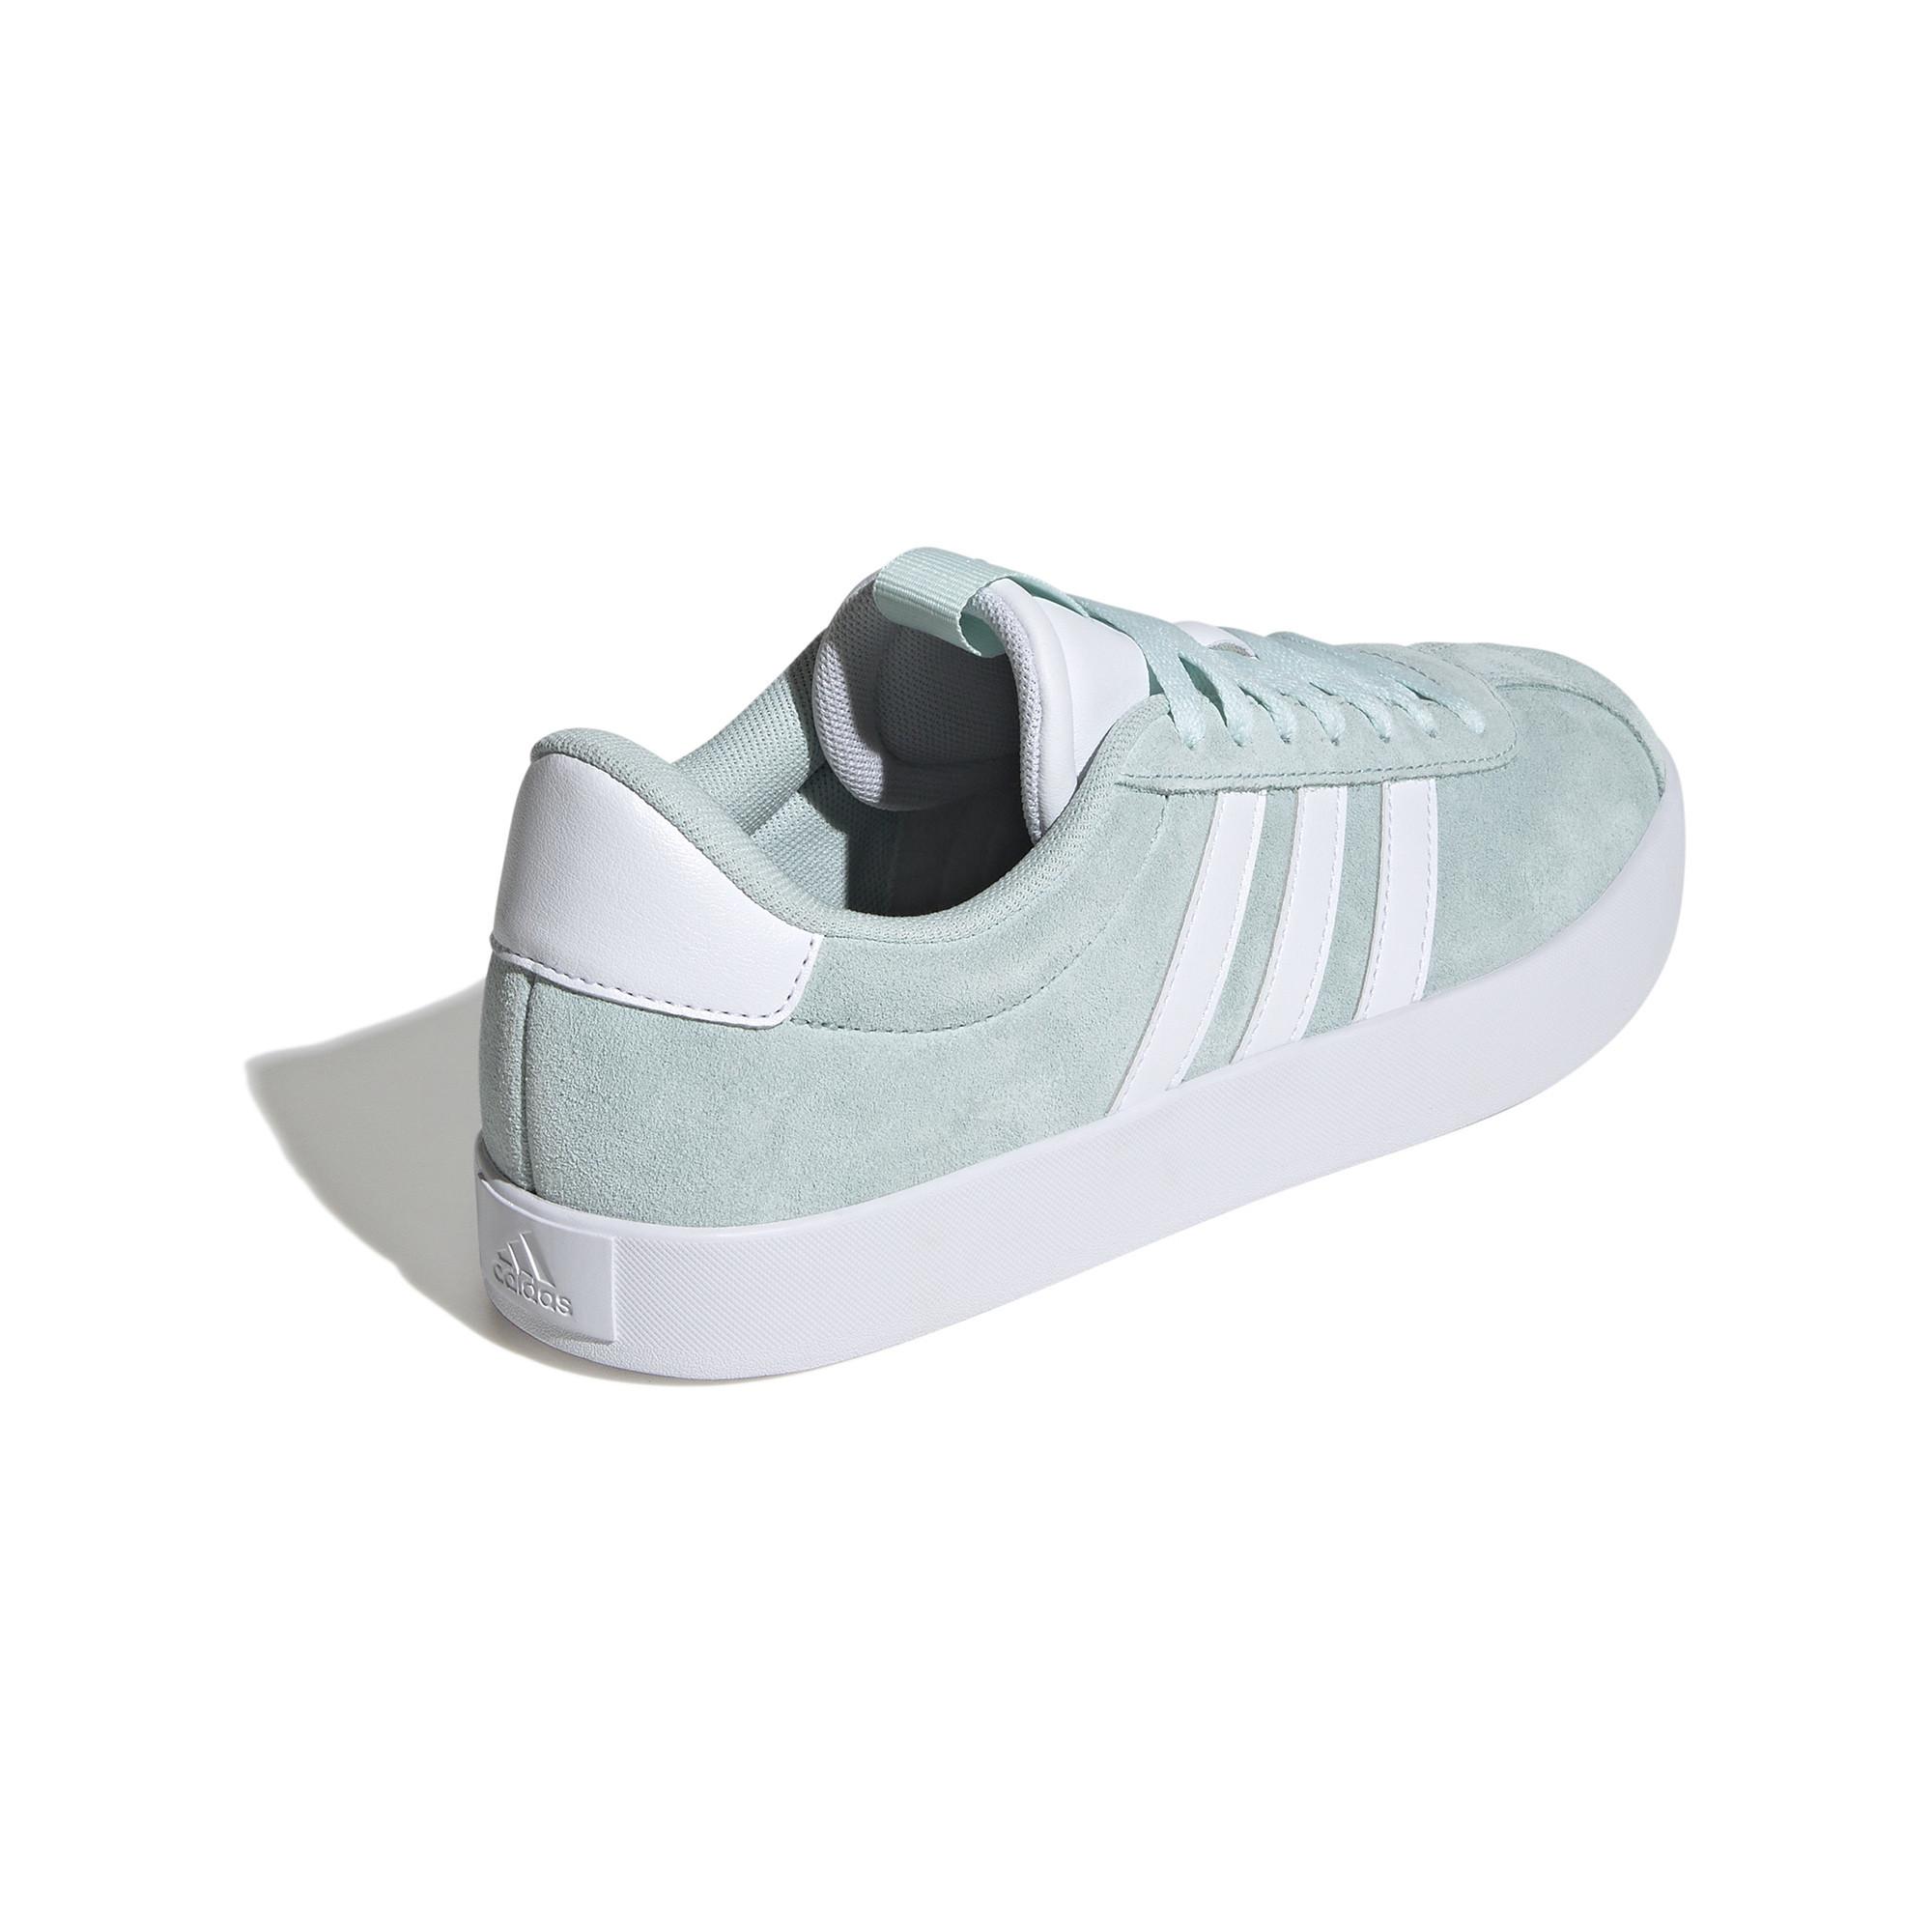 adidas Vl Court 3.0 W Sneakers, Low Top 